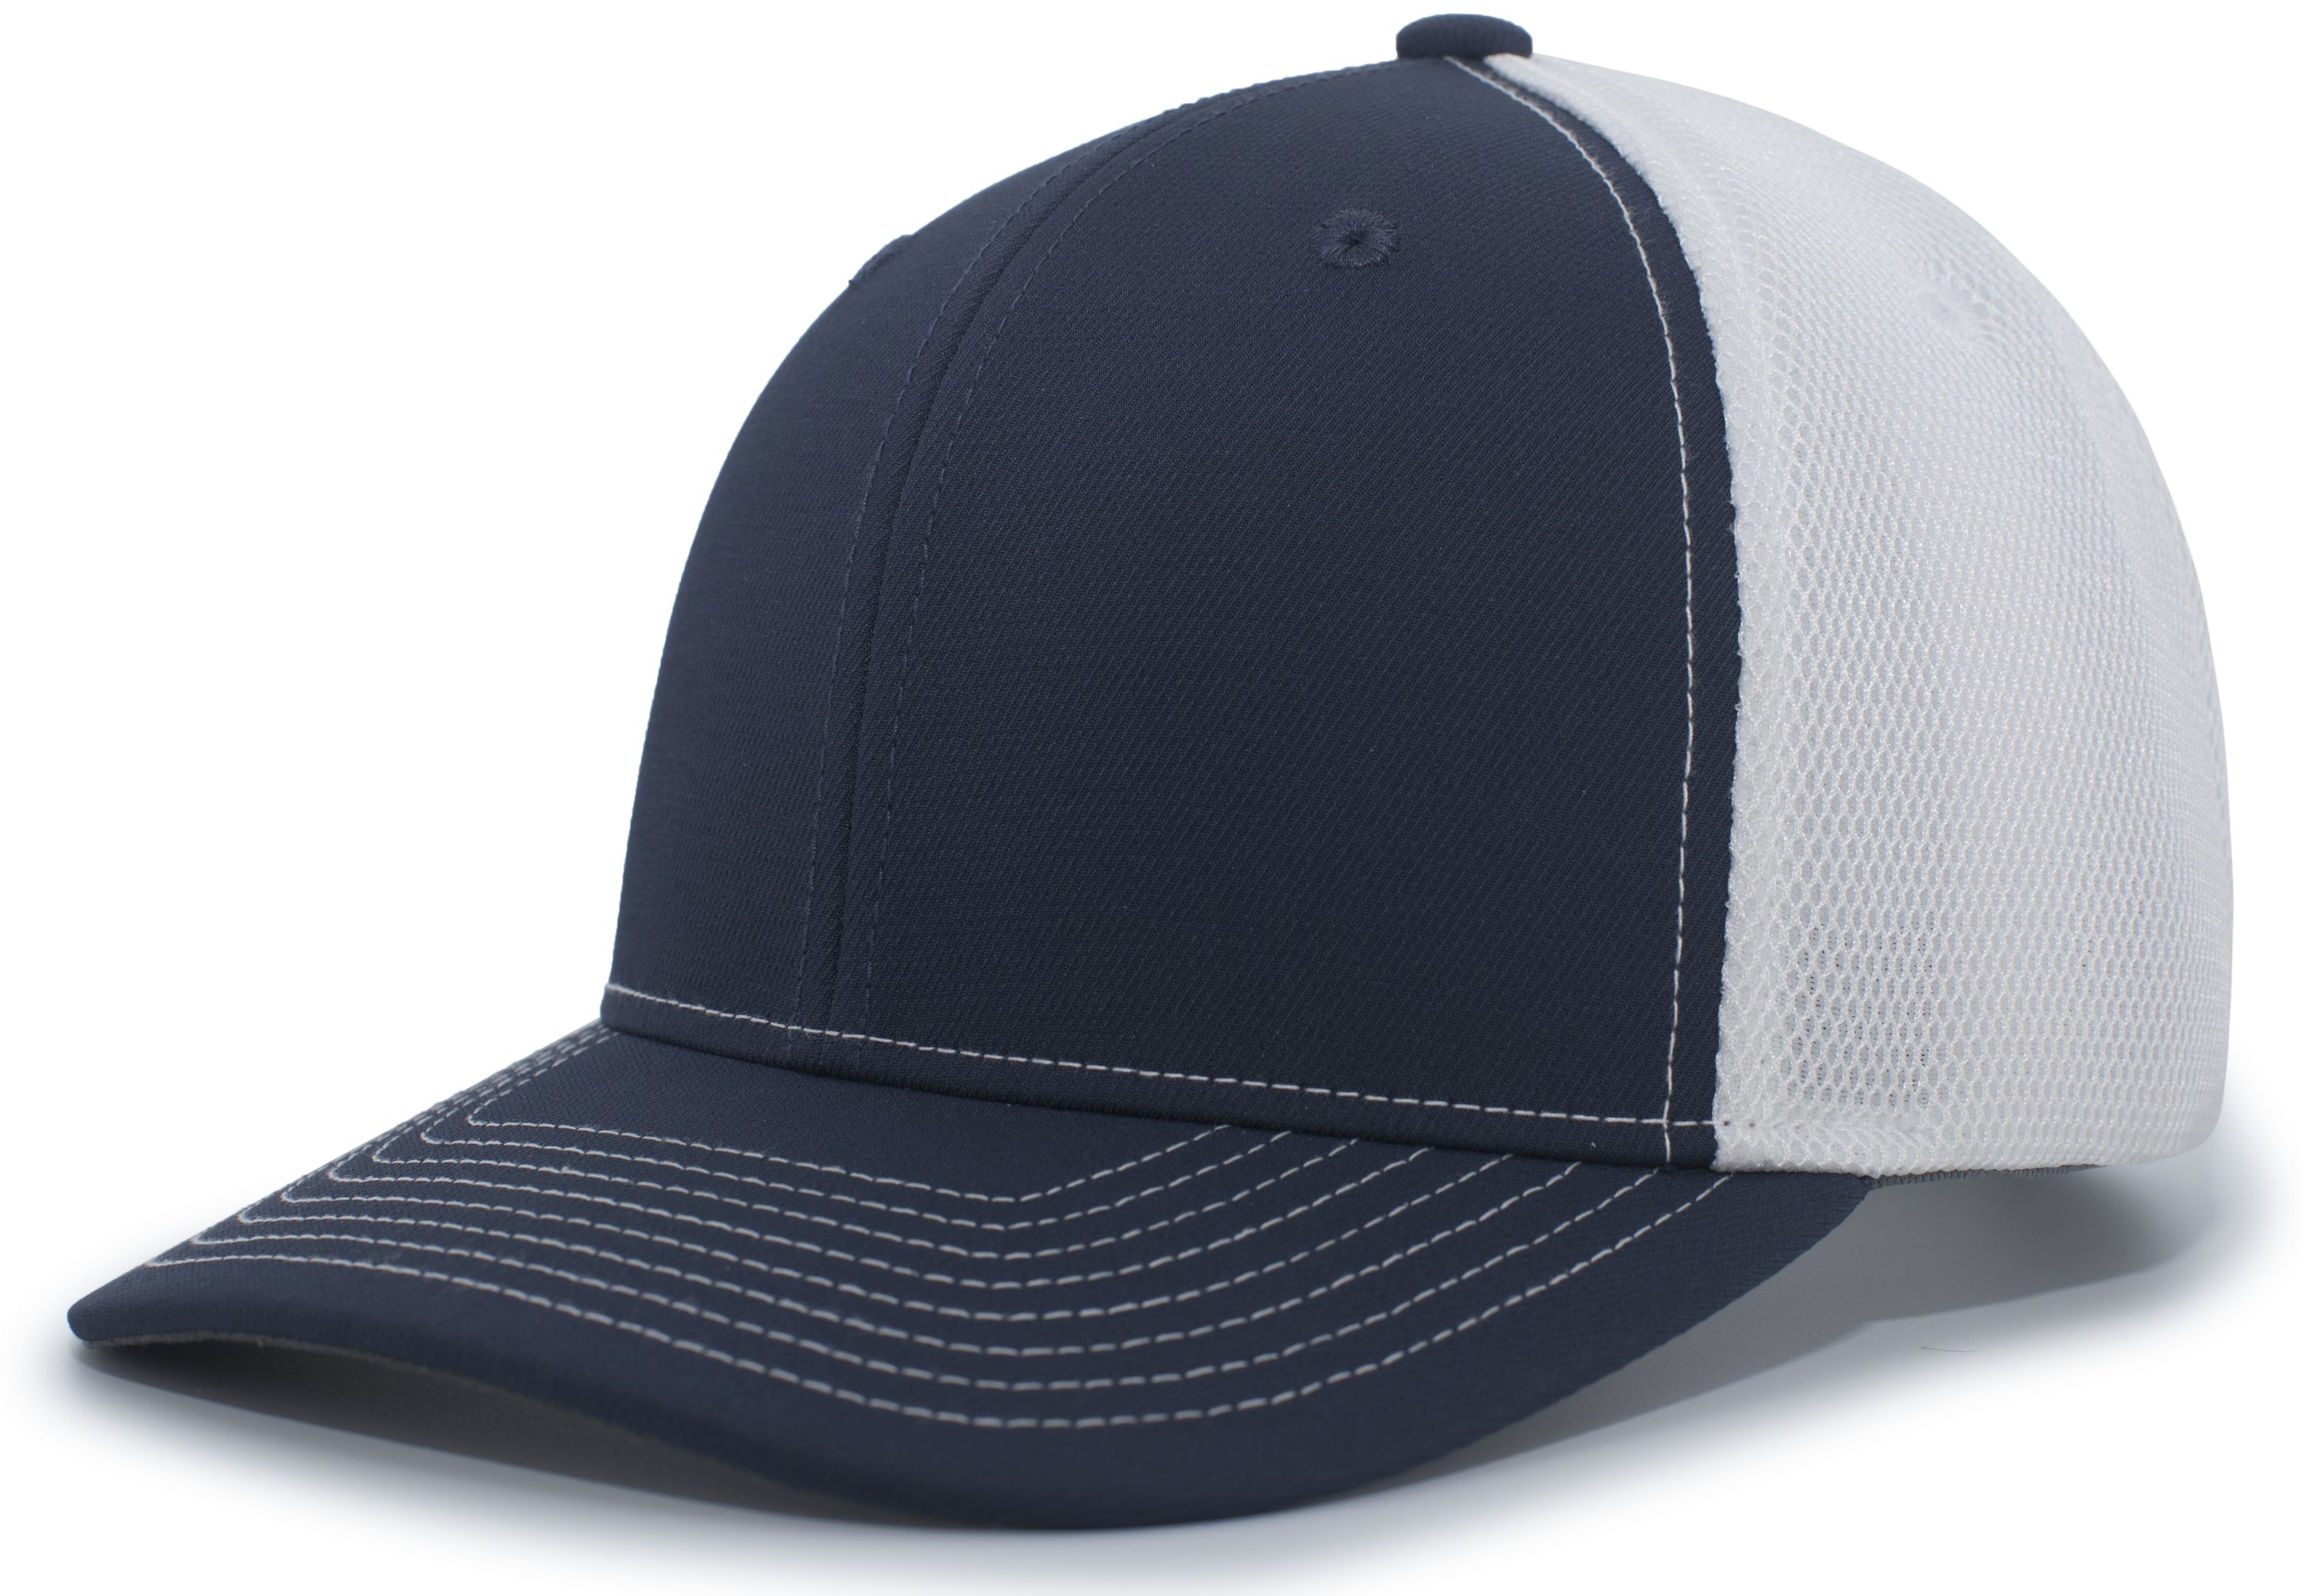 click to view Navy/White/Navy